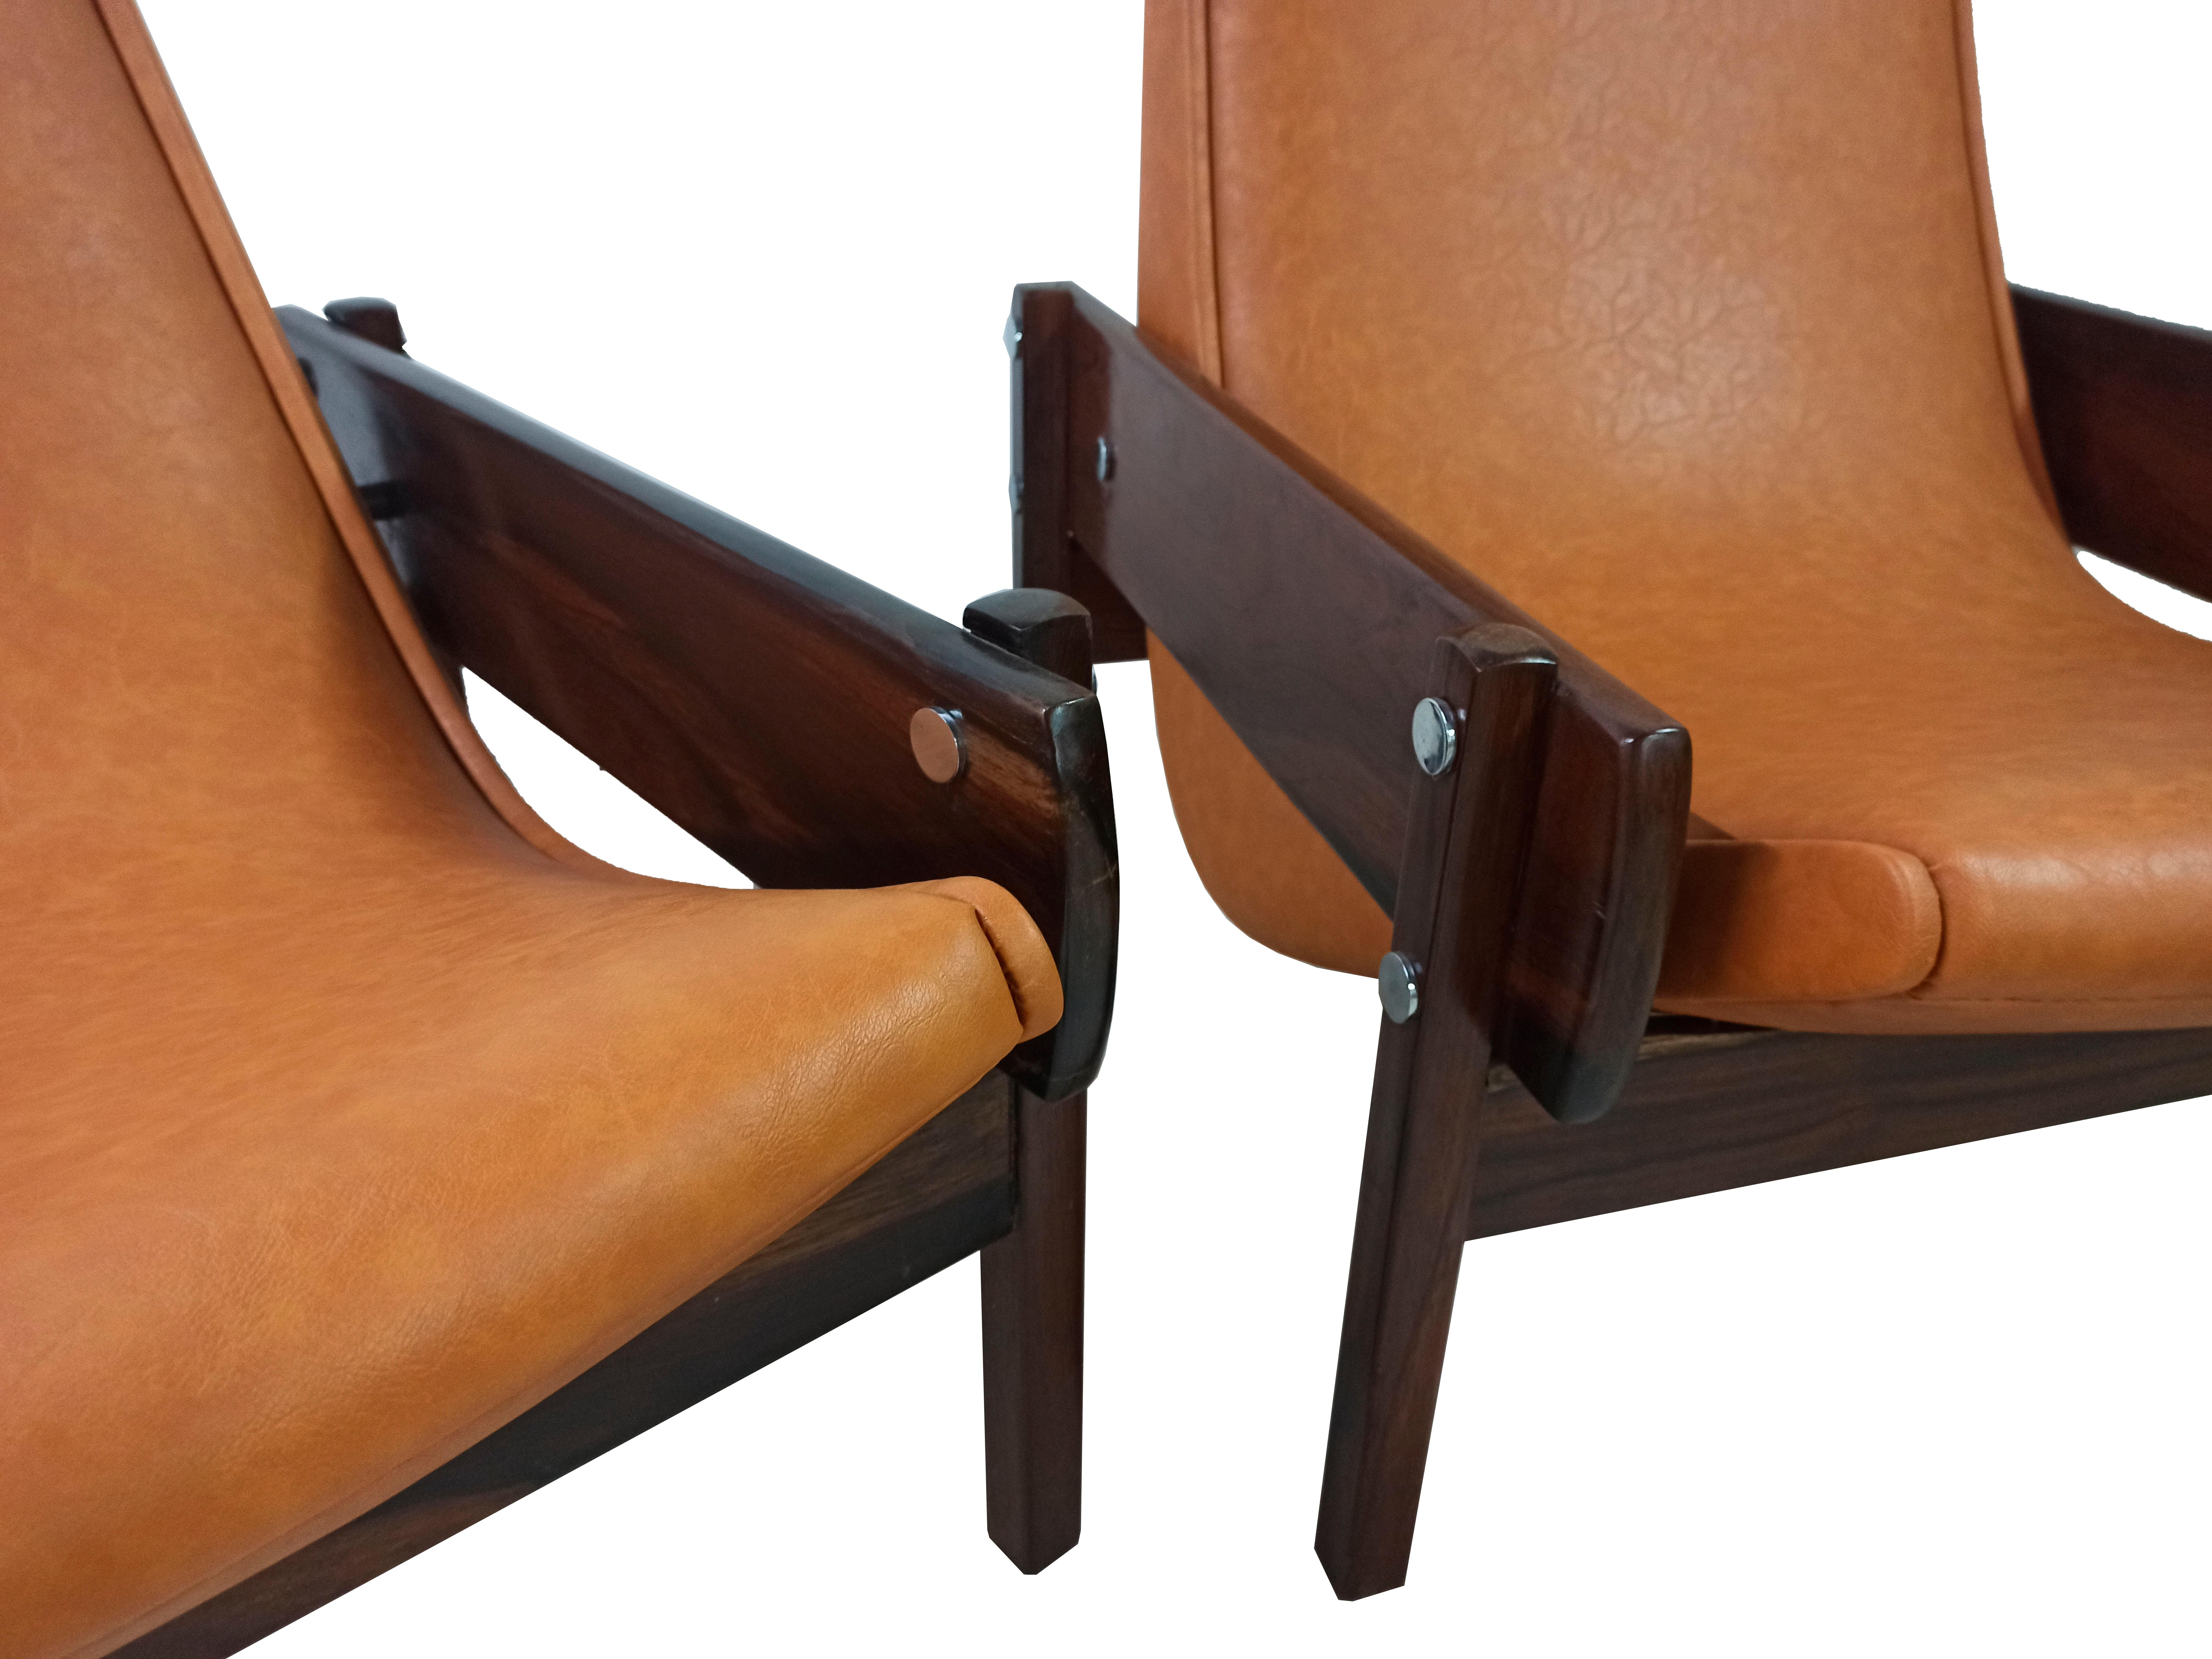 Mid-Century Modern 'Vronka' Armchair by Sergio Rodrigues, Brazil, 1960s

This pair of classic Vronka Armchairs by the acclaimed designer Sergio Rodrigues has wood and curved plywood structure.
It's a one-piece seat and it's back is upholstered in